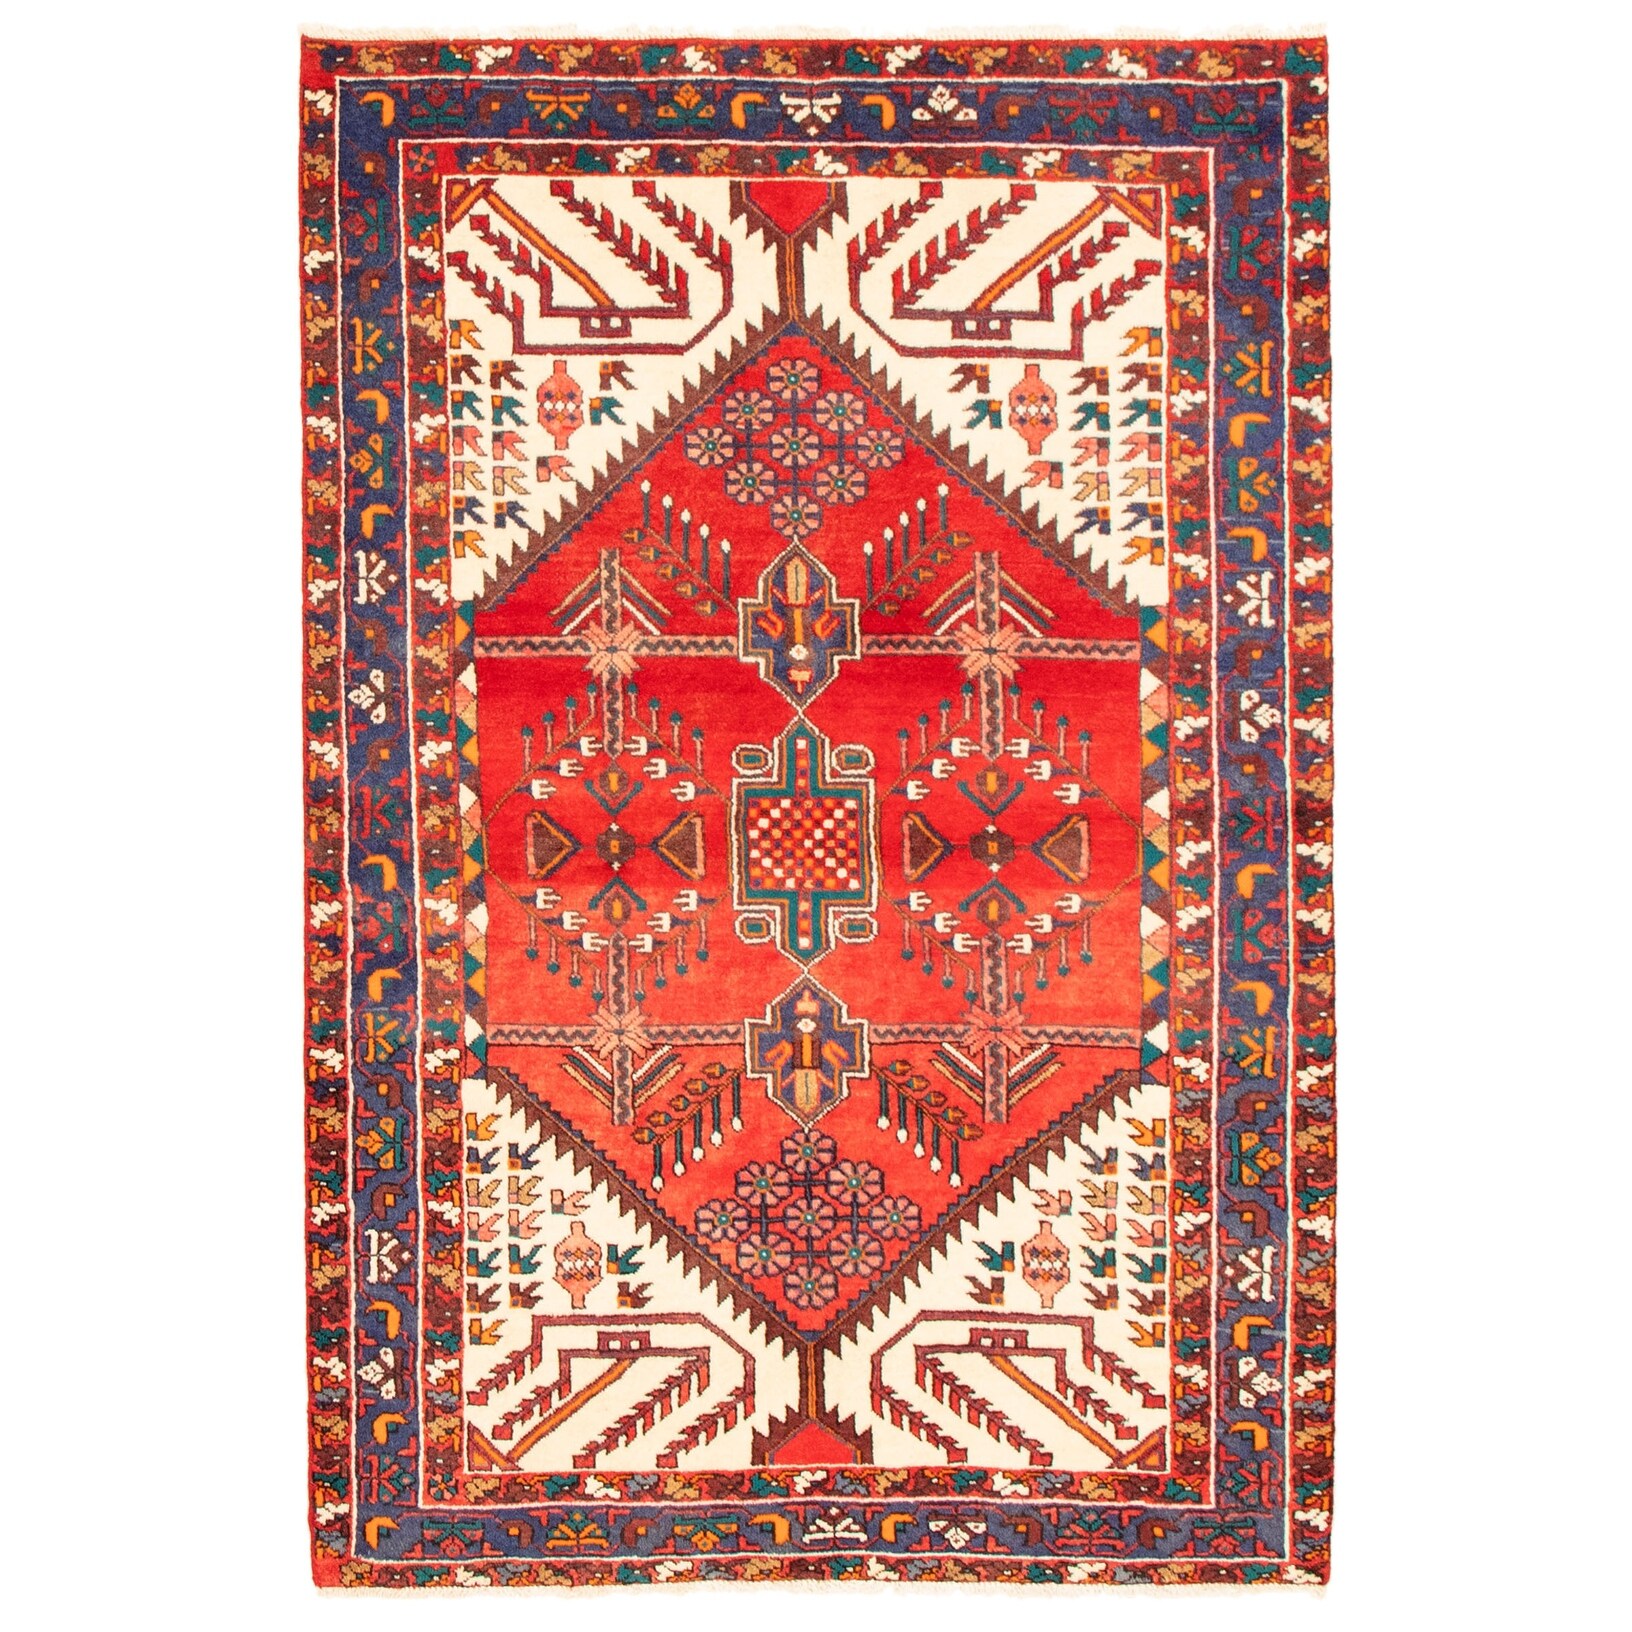 Izmir Carved Red Rug 3'6 x 5'2 Bedroom Hand-Knotted Wool Rug eCarpet Gallery Area Rug for Living Room 332565